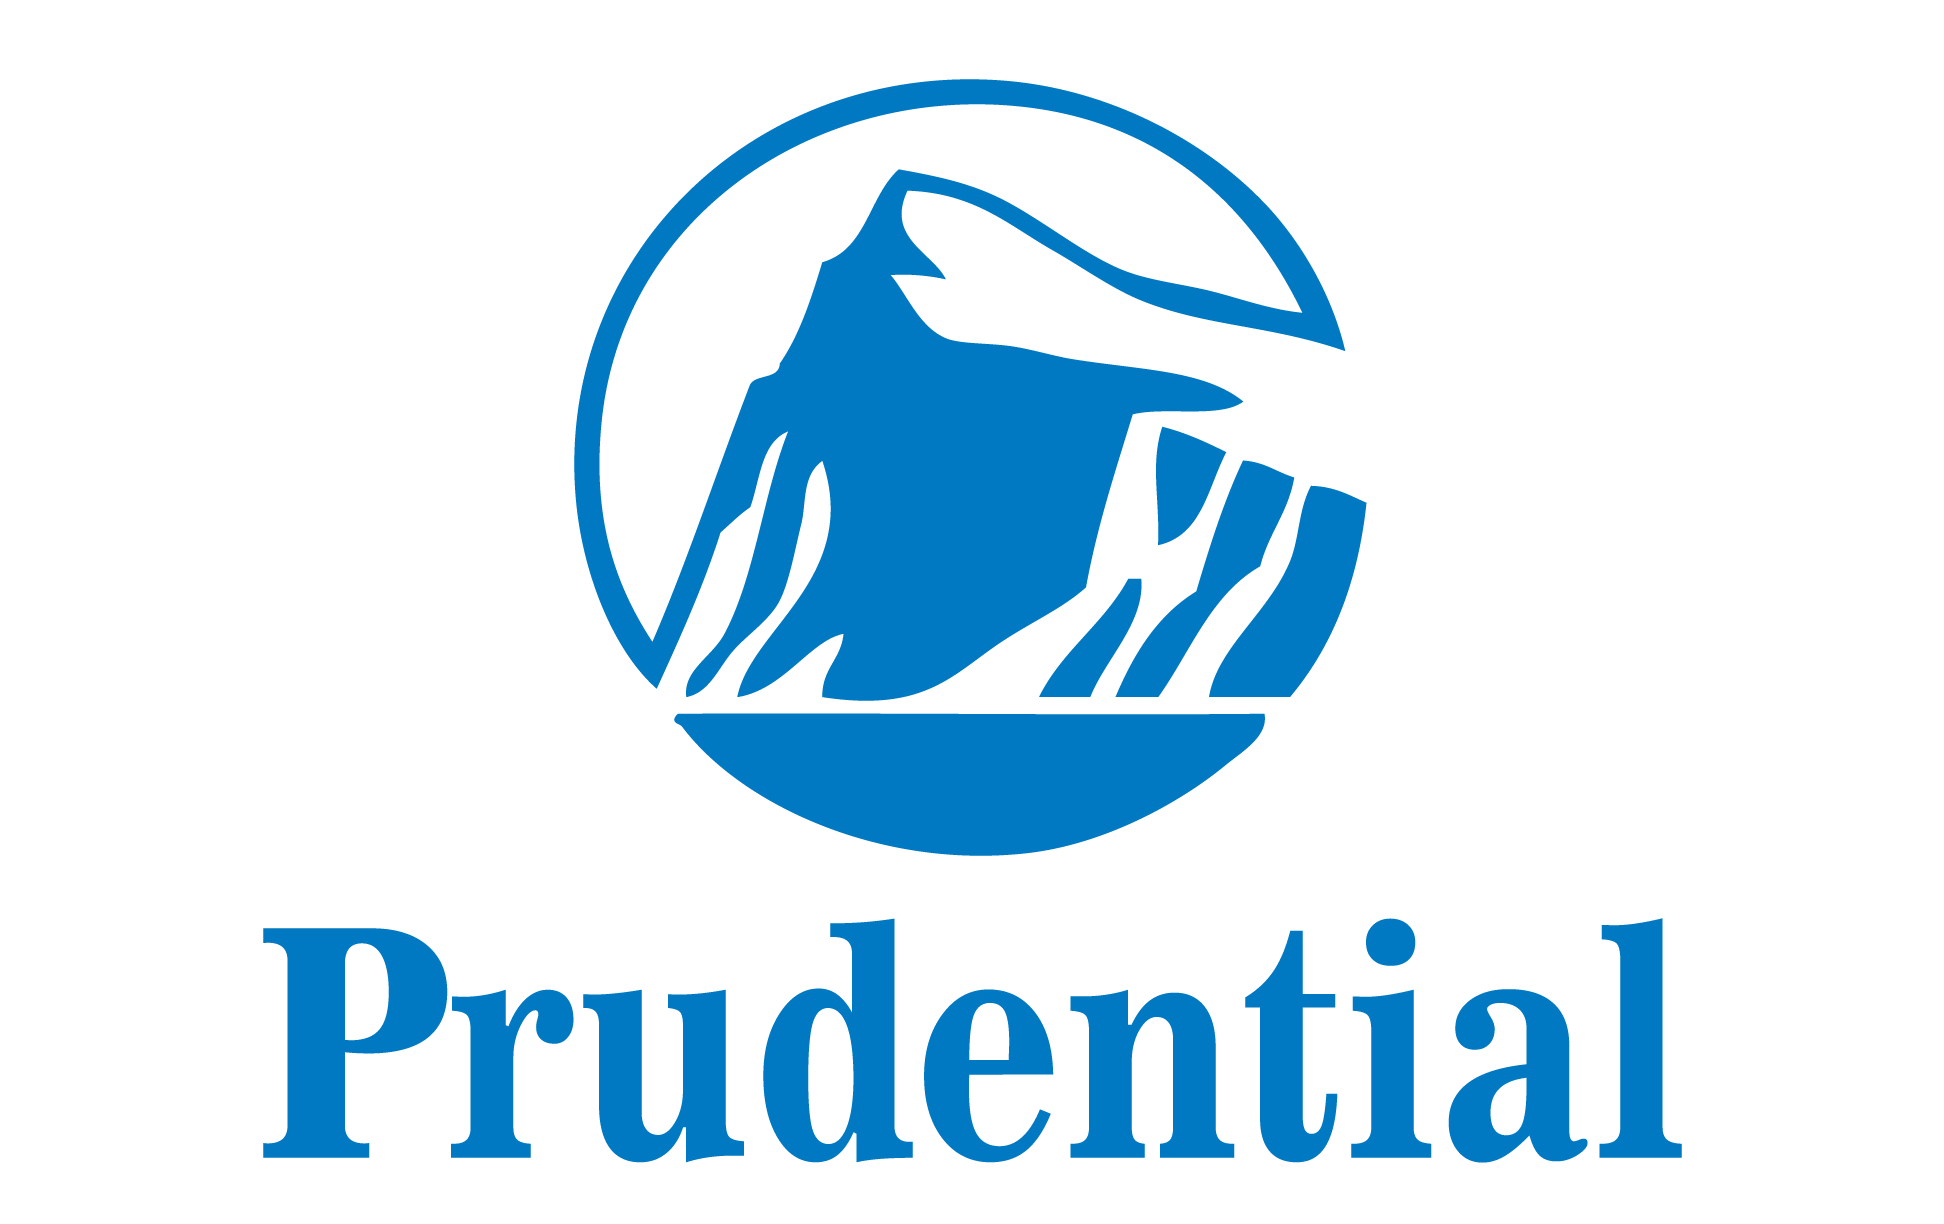 Prudential logo blue stacked